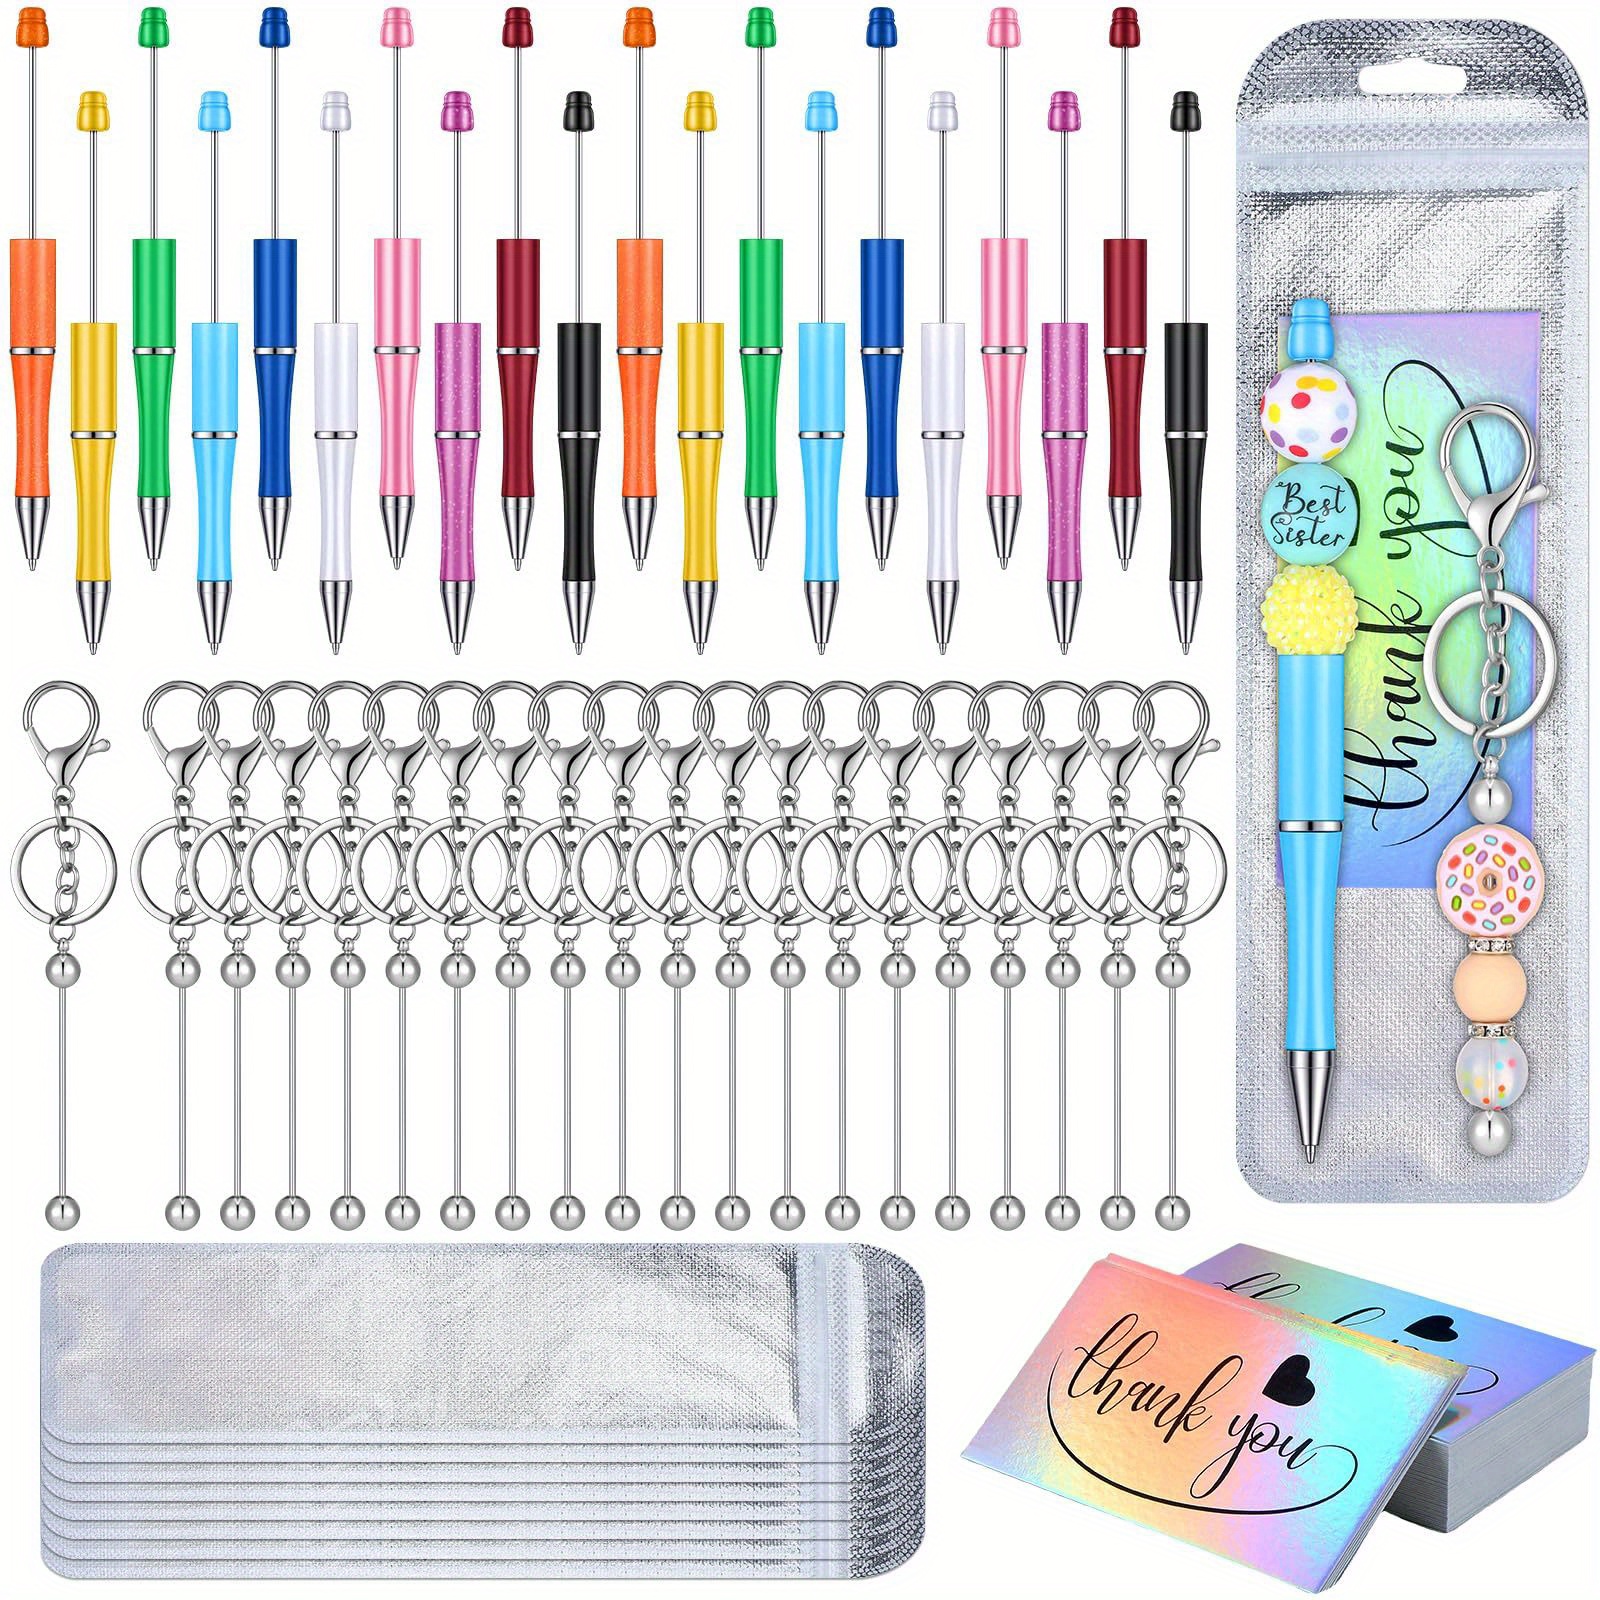 

80pcs Beadable Pen Beadable Keychain Bars With Resealable Pouch Bag And Thank You Cards Set For Diy Bead Pens Wedding Graduation Christmas Gift Office School Supplies